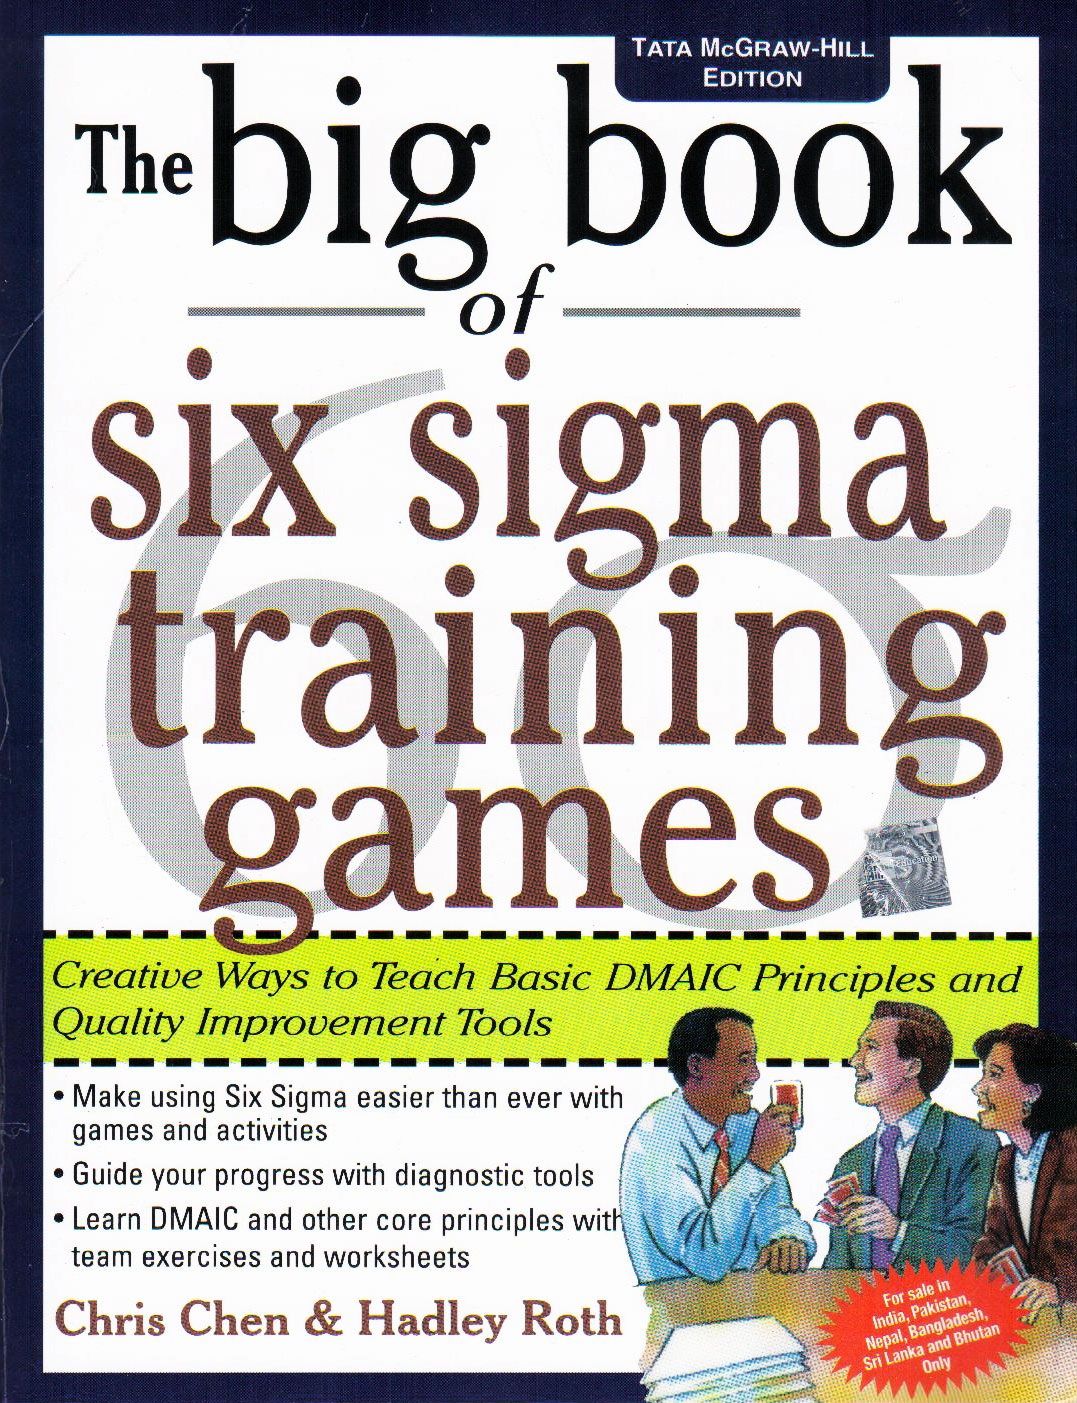 The Big Book of Six Sigma Training Games: Proven Ways to Teach Basic DMAIC Principles and Quality Improvement Tools (Big Book Series) Chris Chen and Hadley Roth